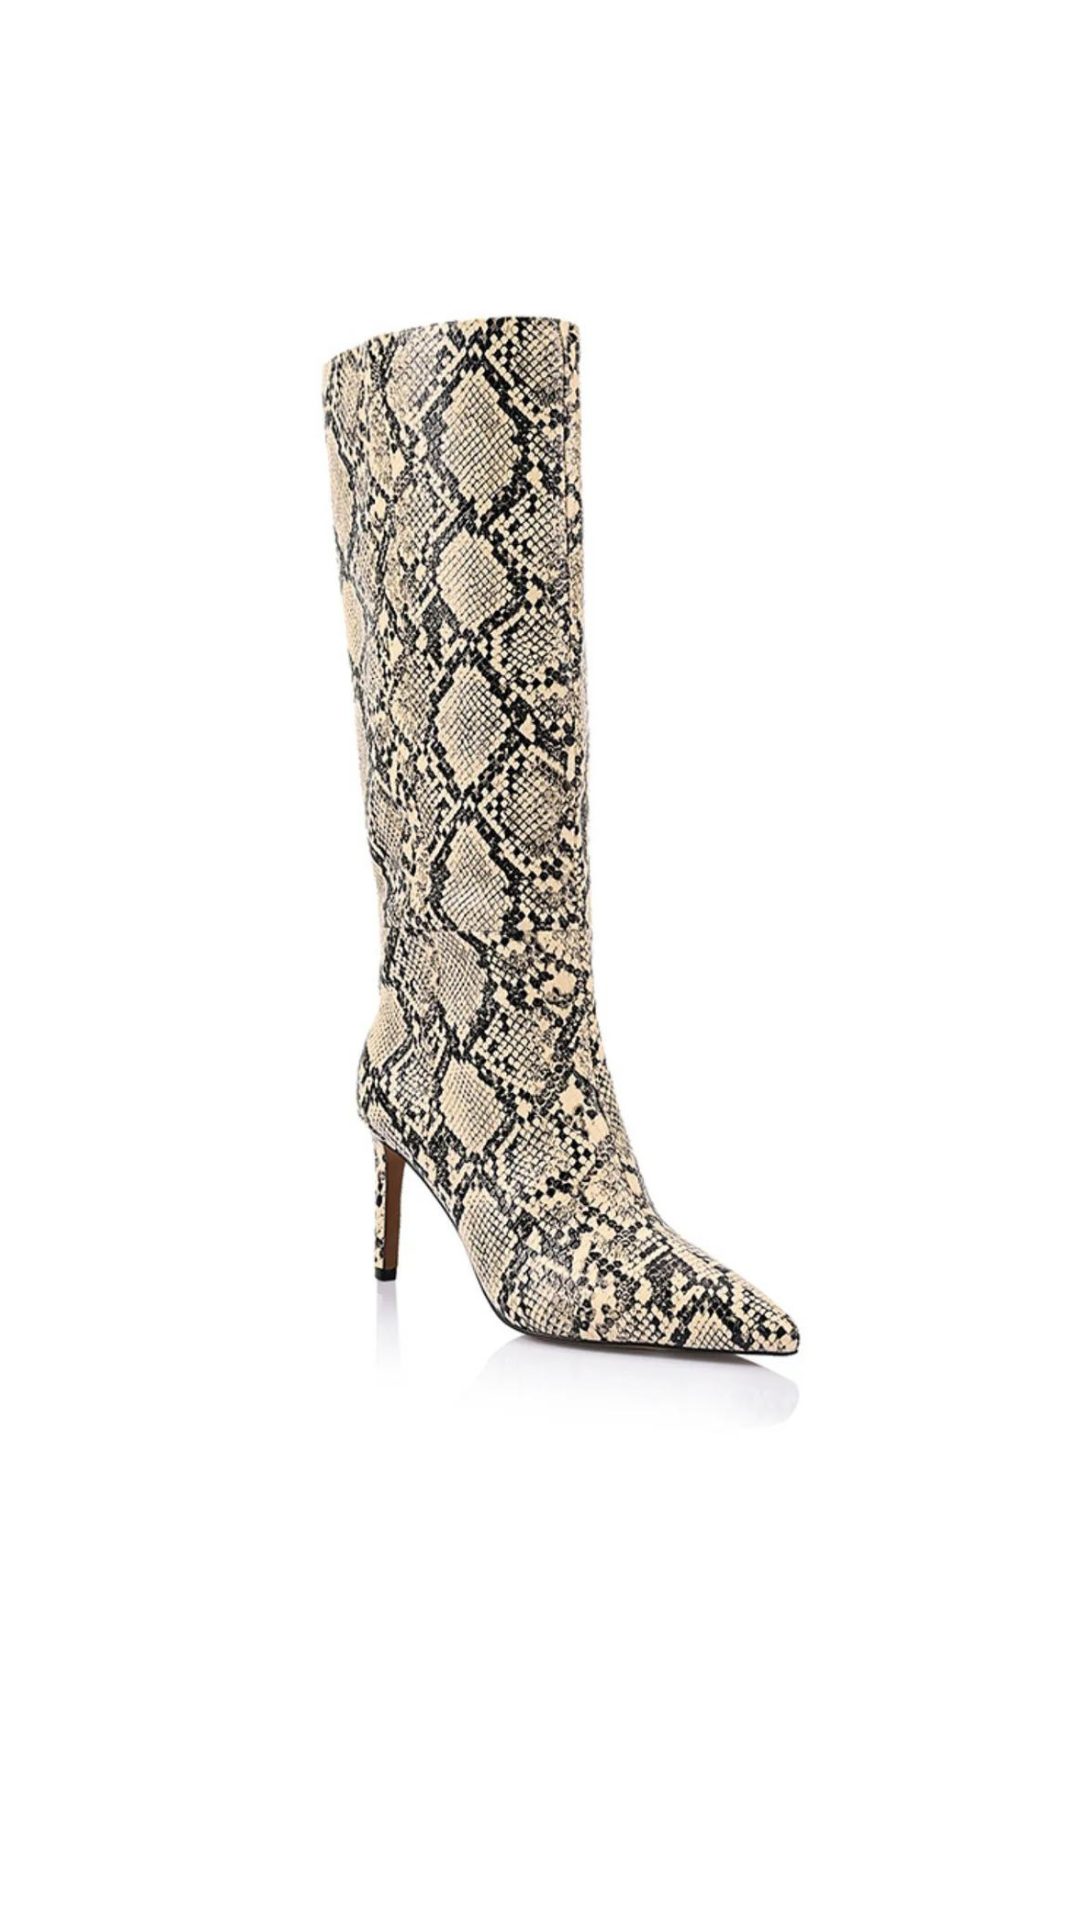 Lana Wilkinson - Huw Snake Print Leather Boots